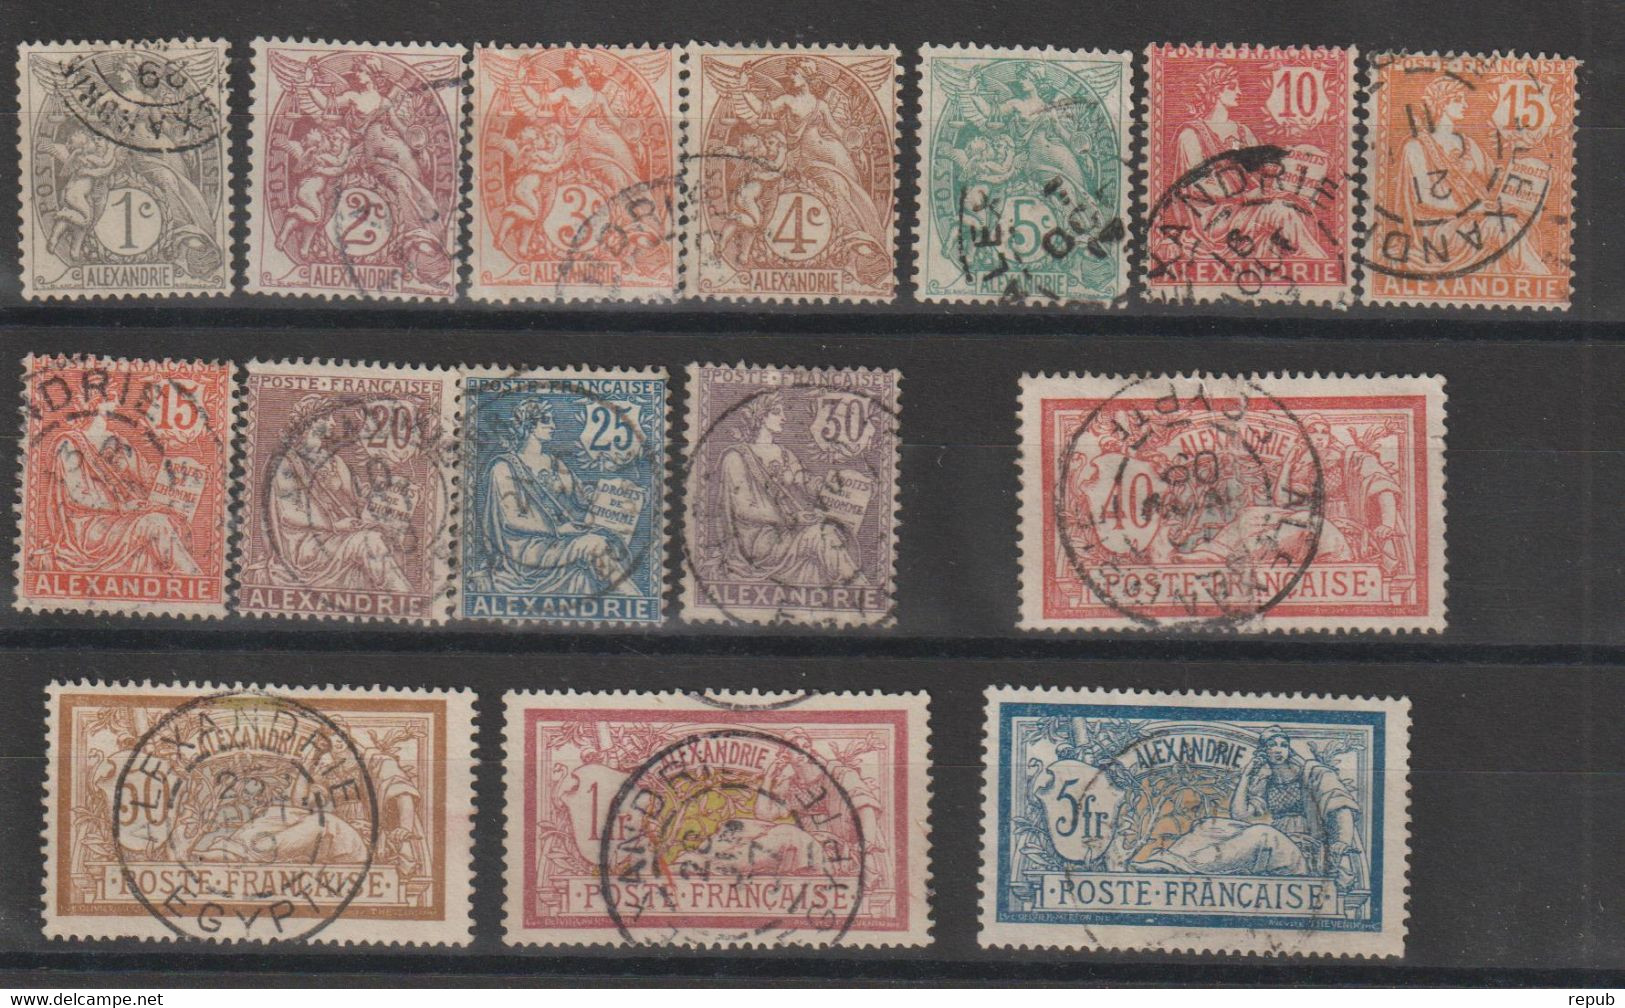 Alexandrie 1902-1903 Série Courante 19-33 Sauf 32 + 25a, 15 Val Oblit Used - Used Stamps